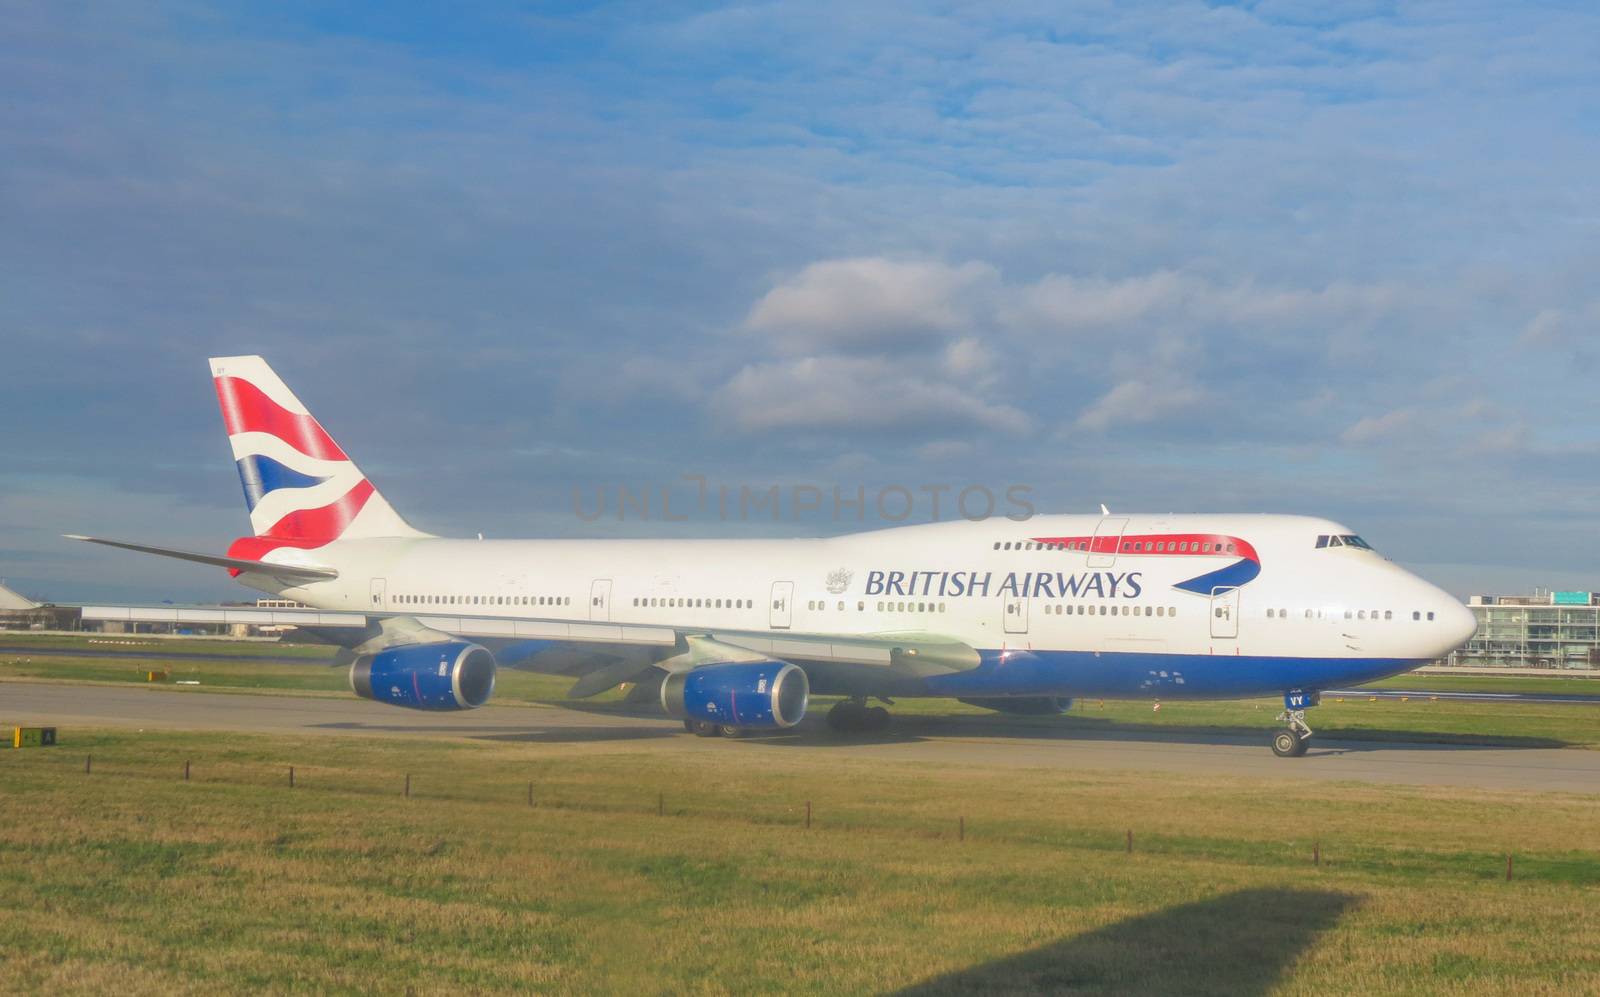 LONDON HEATHROW, UK - CIRCA DECEMBER 2014: Boeing 747 Jumbo aircraft of the British Airways on the runway ready for take-off